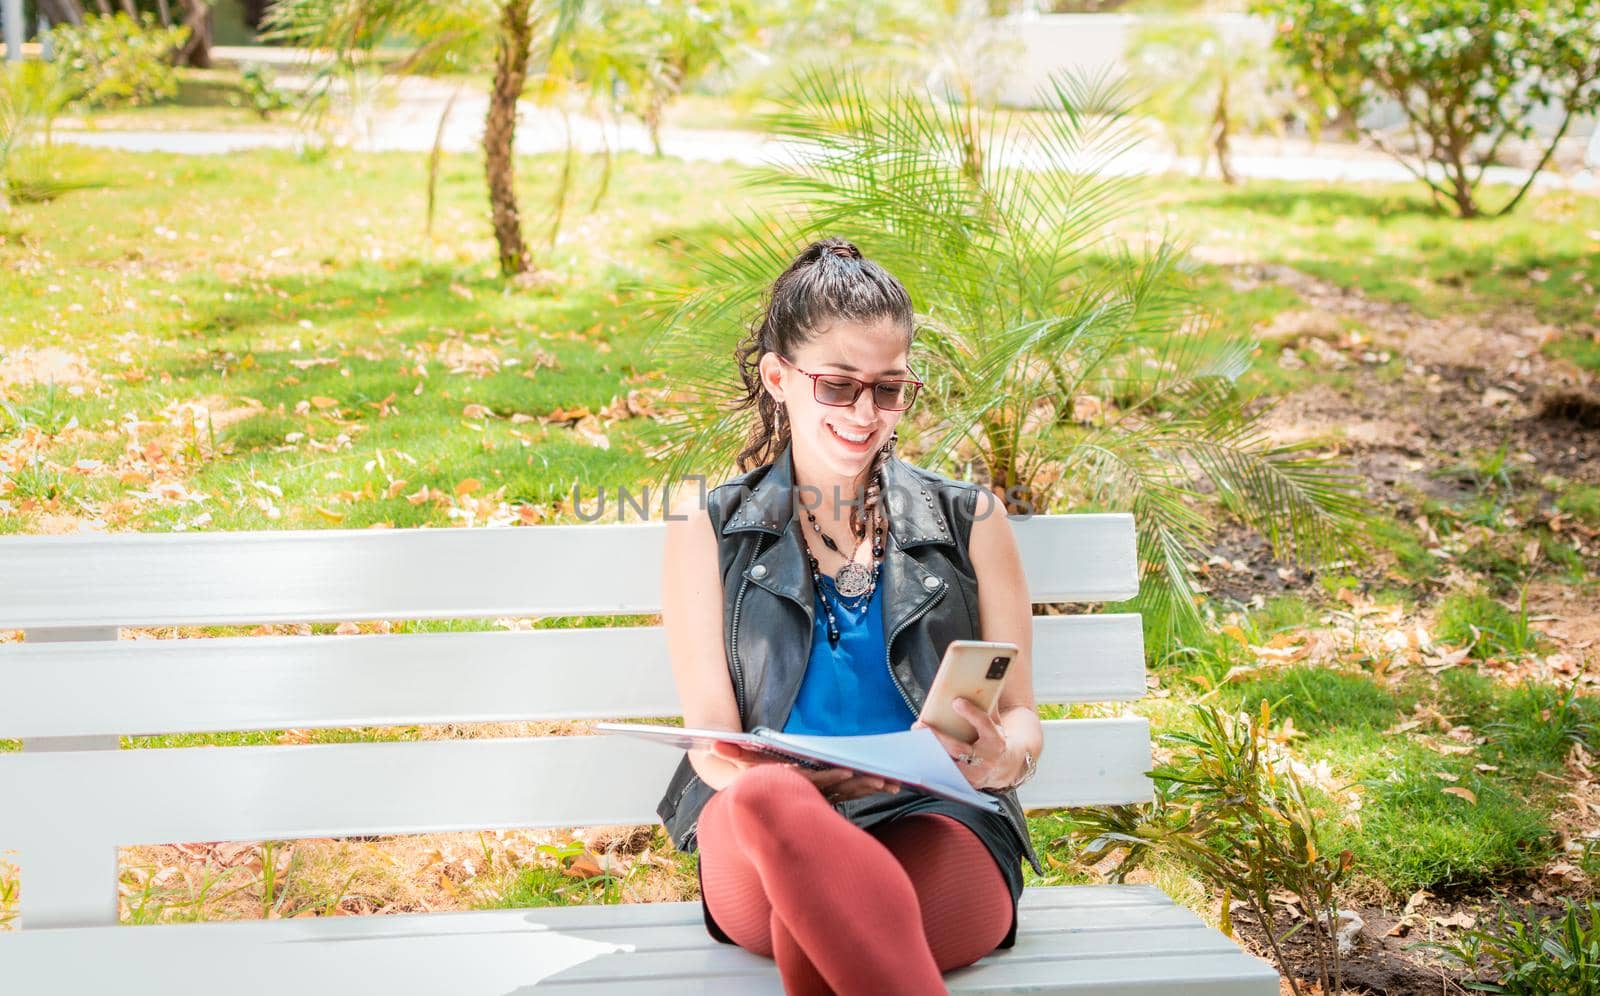 A girl sitting taking notes with a notebook and cell phone, Woman sitting taking notes with her cell phone, Latin girl using her cell phone in a park